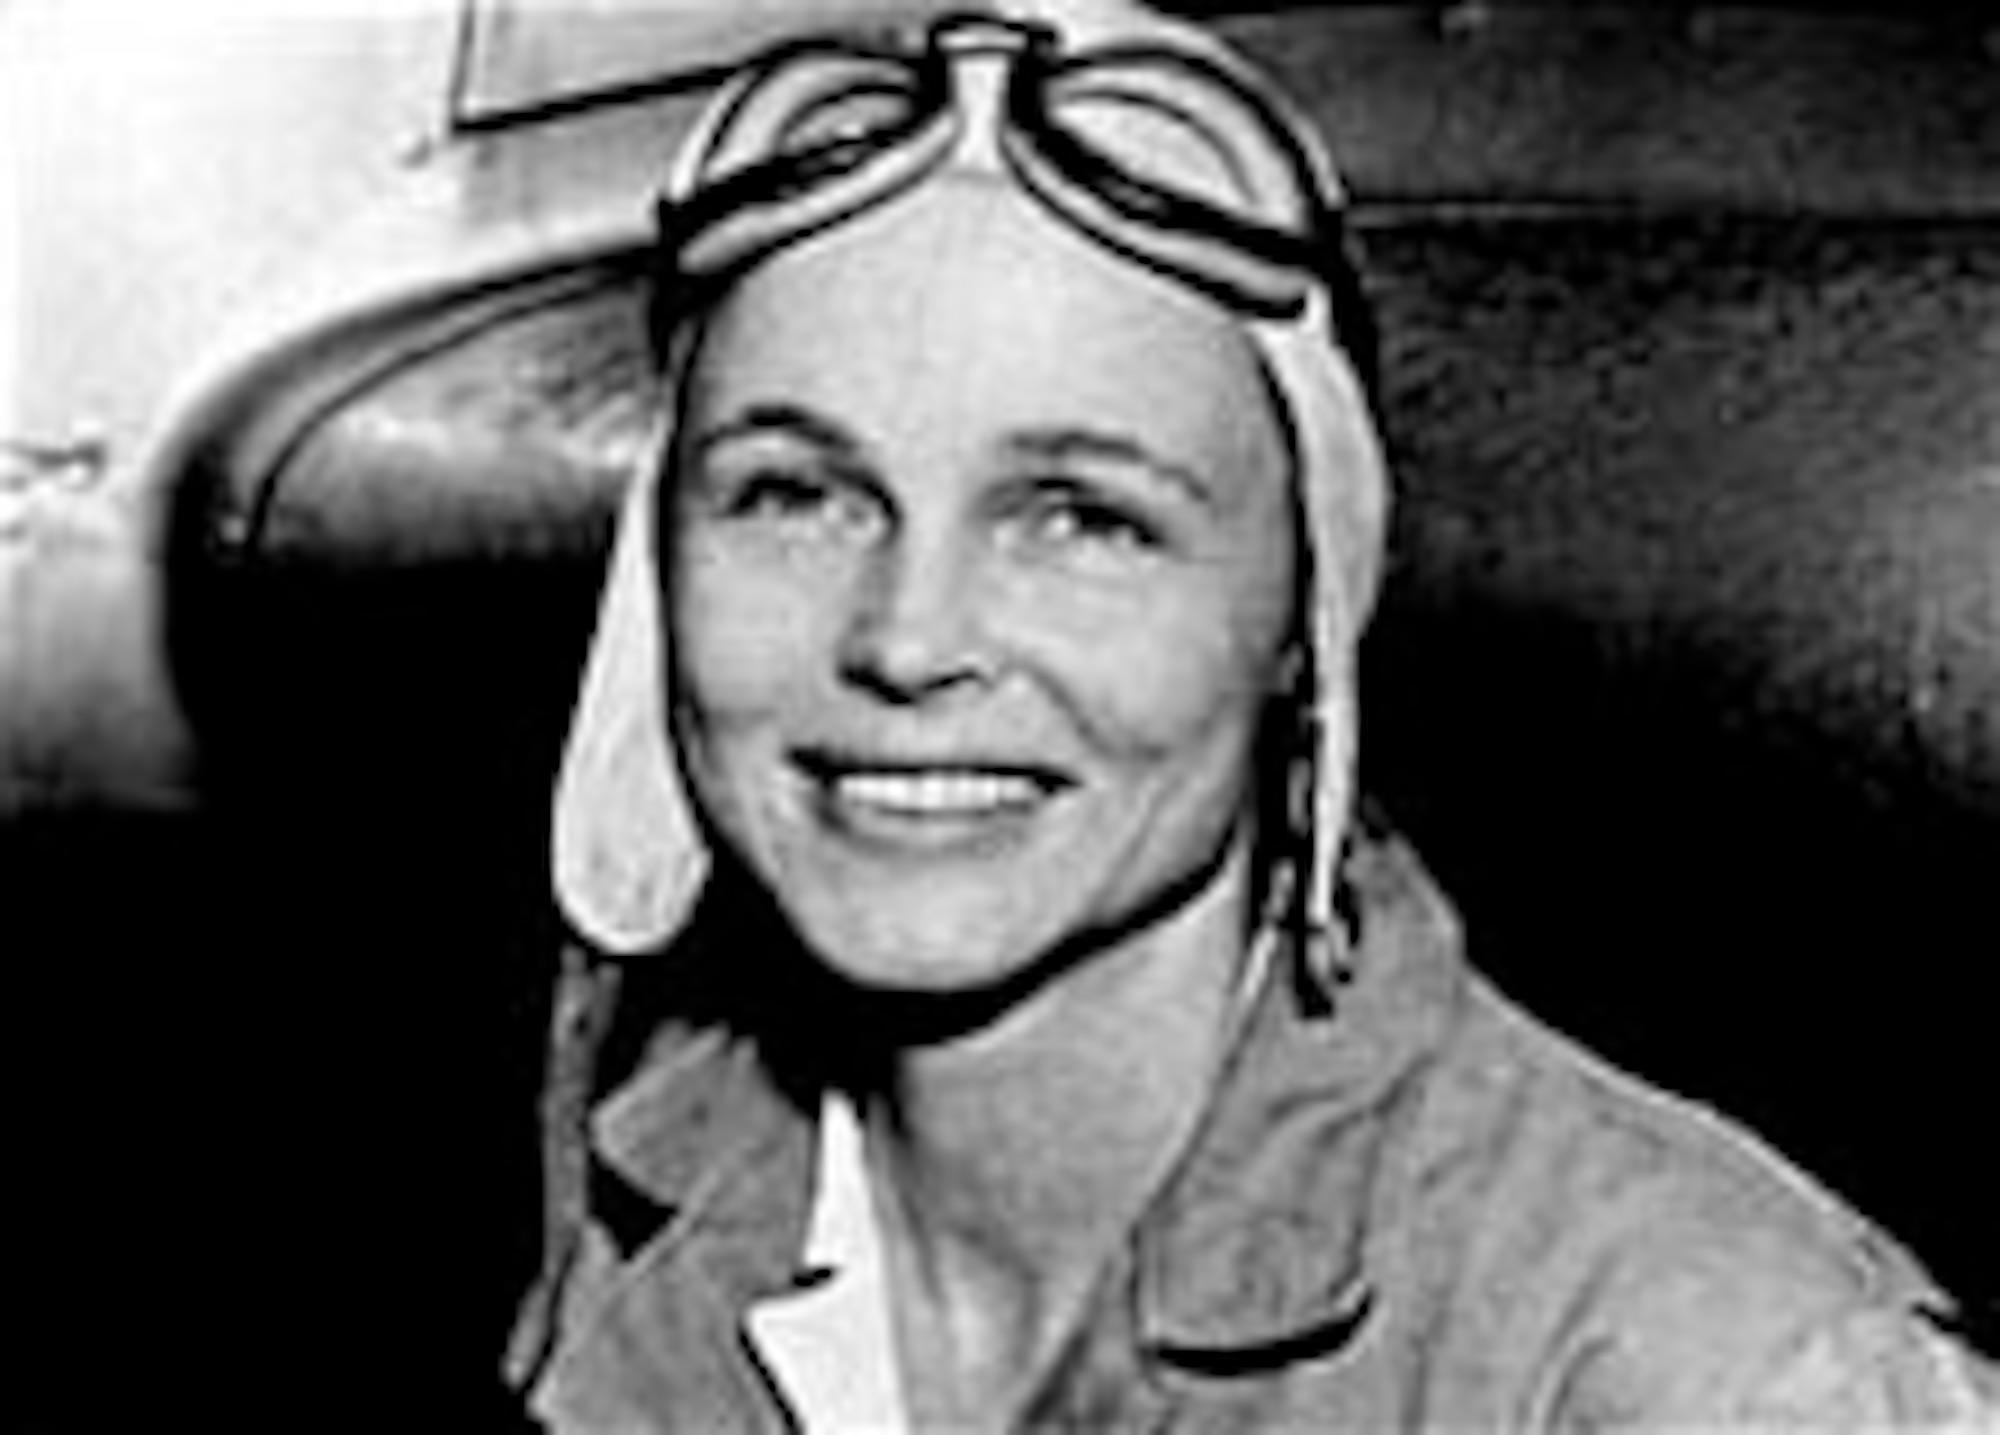 Betty Gillies, the first WAFS pilot to qualify. (U.S. Air Force photo)